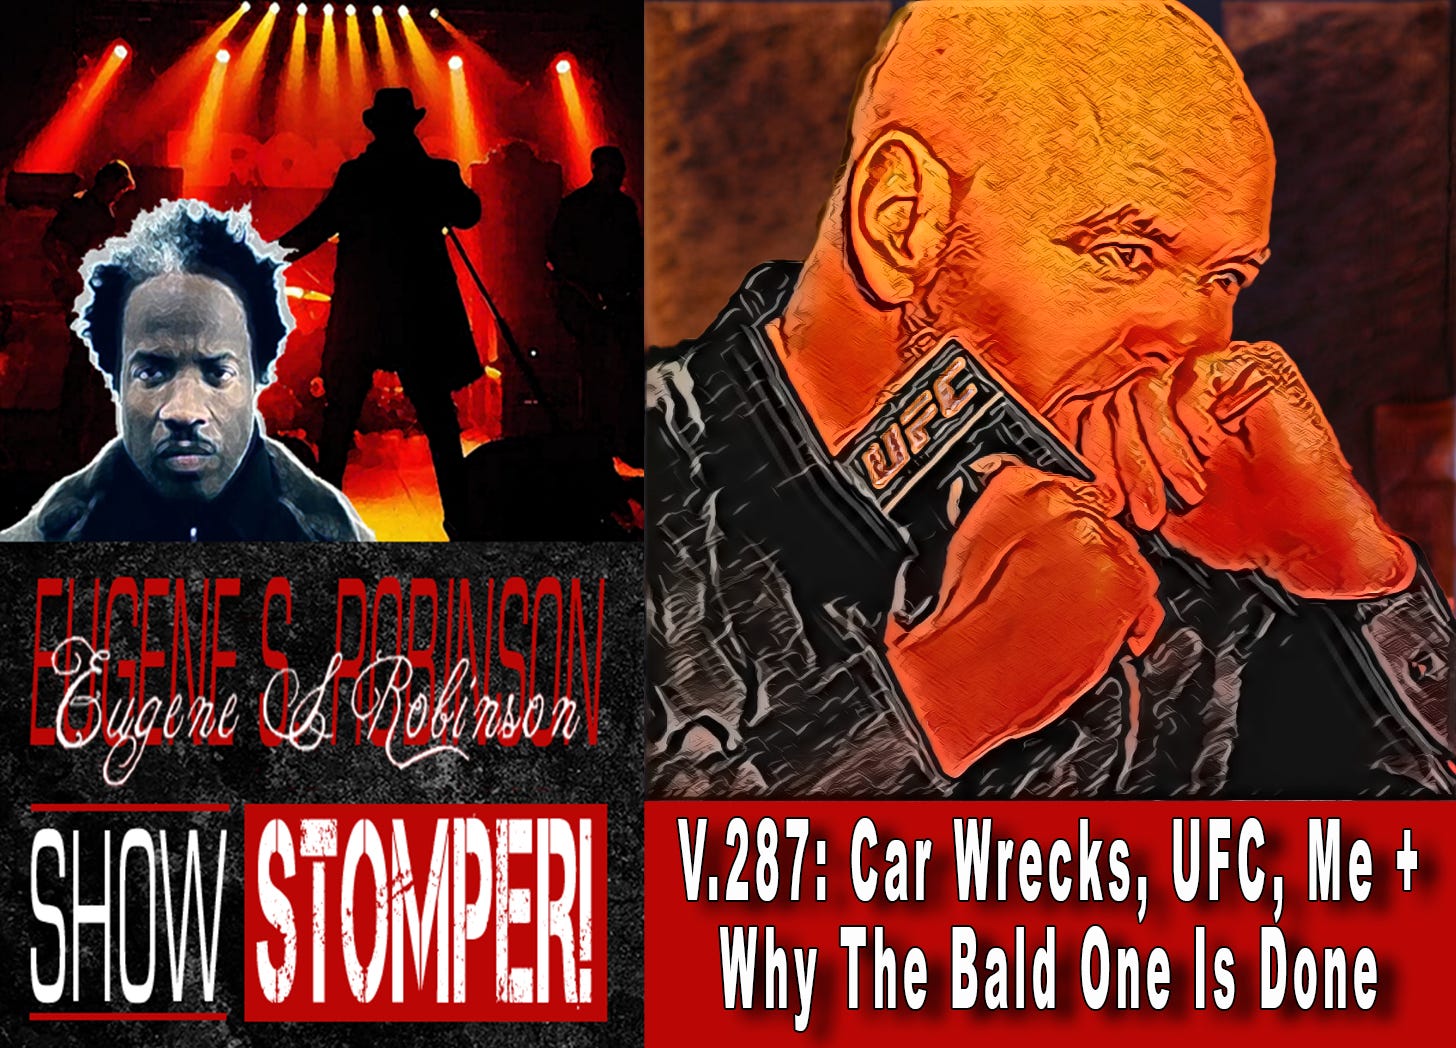 V.287: Car Wrecks, UFC, Me + Why The Bald One Is Done All On The Eugene S. Robinson Show Stomper!